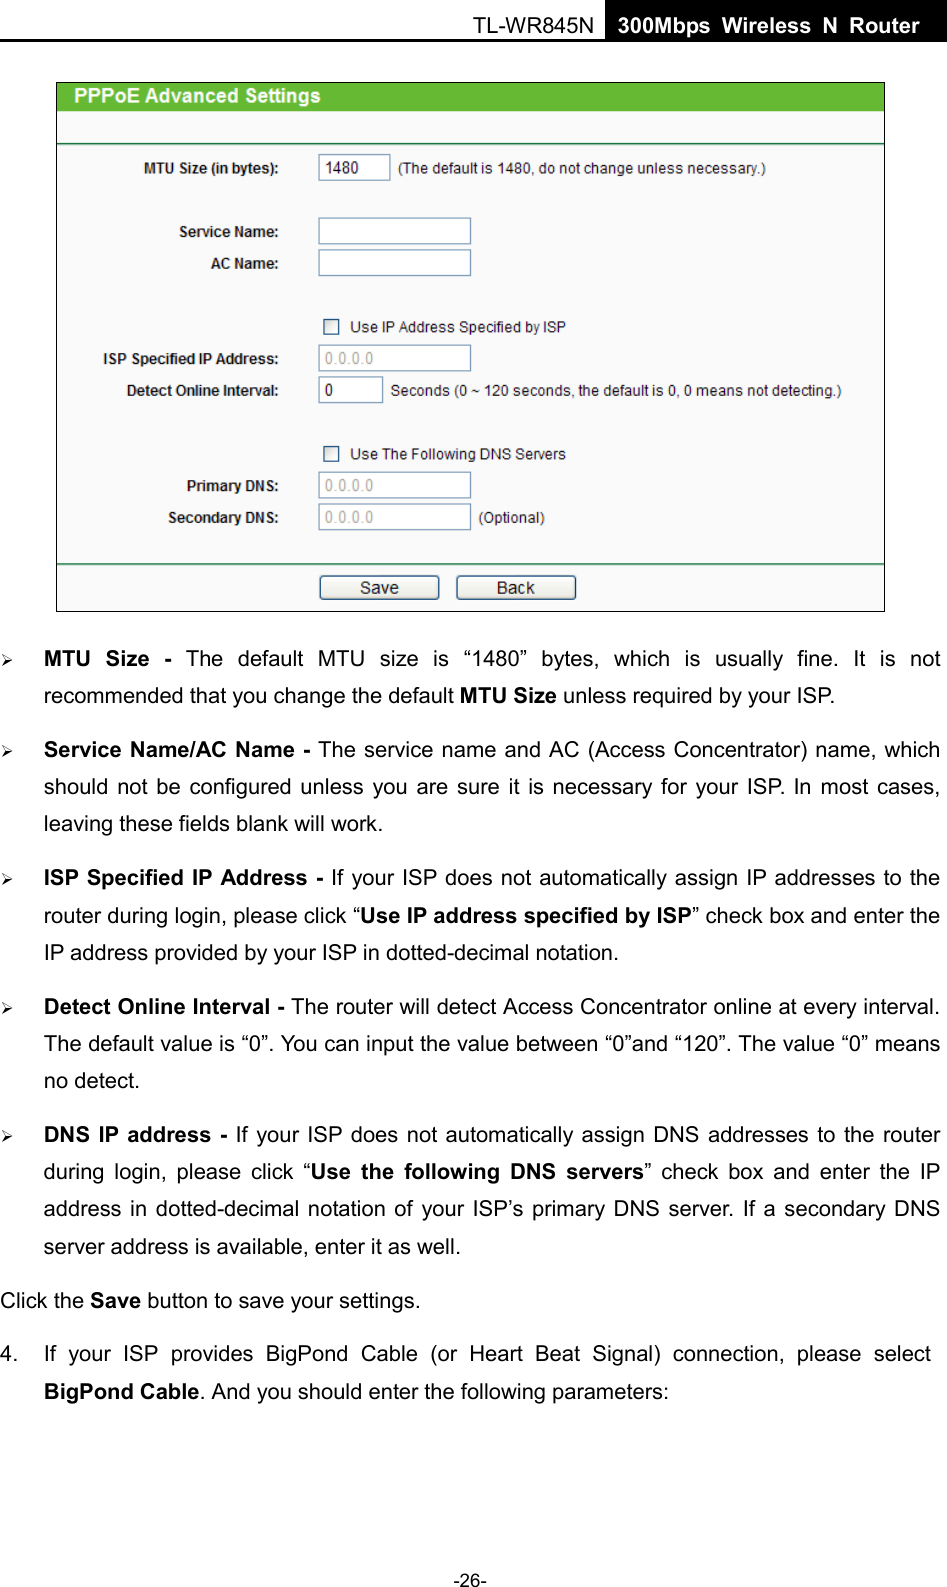  TL-WR845N  300Mbps Wireless N Router      MTU  Size  - The default MTU size is “1480”  bytes, which is usually fine.  It is not recommended that you change the default MTU Size unless required by your IS P.  Service Name/AC Name - The service name and AC (Access Concentrator) name, which should not be configured unless you are sure it is necessary for your ISP. In most cases, leaving these fields blank will work.  ISP Specified IP Address - If your ISP does not automatically assign IP addresses to the   router during login, please click “Use IP address specified by ISP” check box and enter the IP address provided by your ISP in dotted-decimal notation.  Detect Online Interval - The router will detect Access Concentrator online at every interval. The default value is “0”. You can input the value between “0”and “120”. The value “0” means no detect.  DNS IP address - If your ISP does not automatically assign DNS addresses to the router during login, please  click “Use the following DNS servers” check box and enter the IP address in dotted-decimal notation of your ISP’s primary DNS server. If a secondary DNS server address is available, enter it as well. Click the Save button to save your settings. 4. If your ISP provides BigPond Cable (or Heart Beat Signal) connection, please select BigPond Cable. And you should enter the following parameters: -26- 